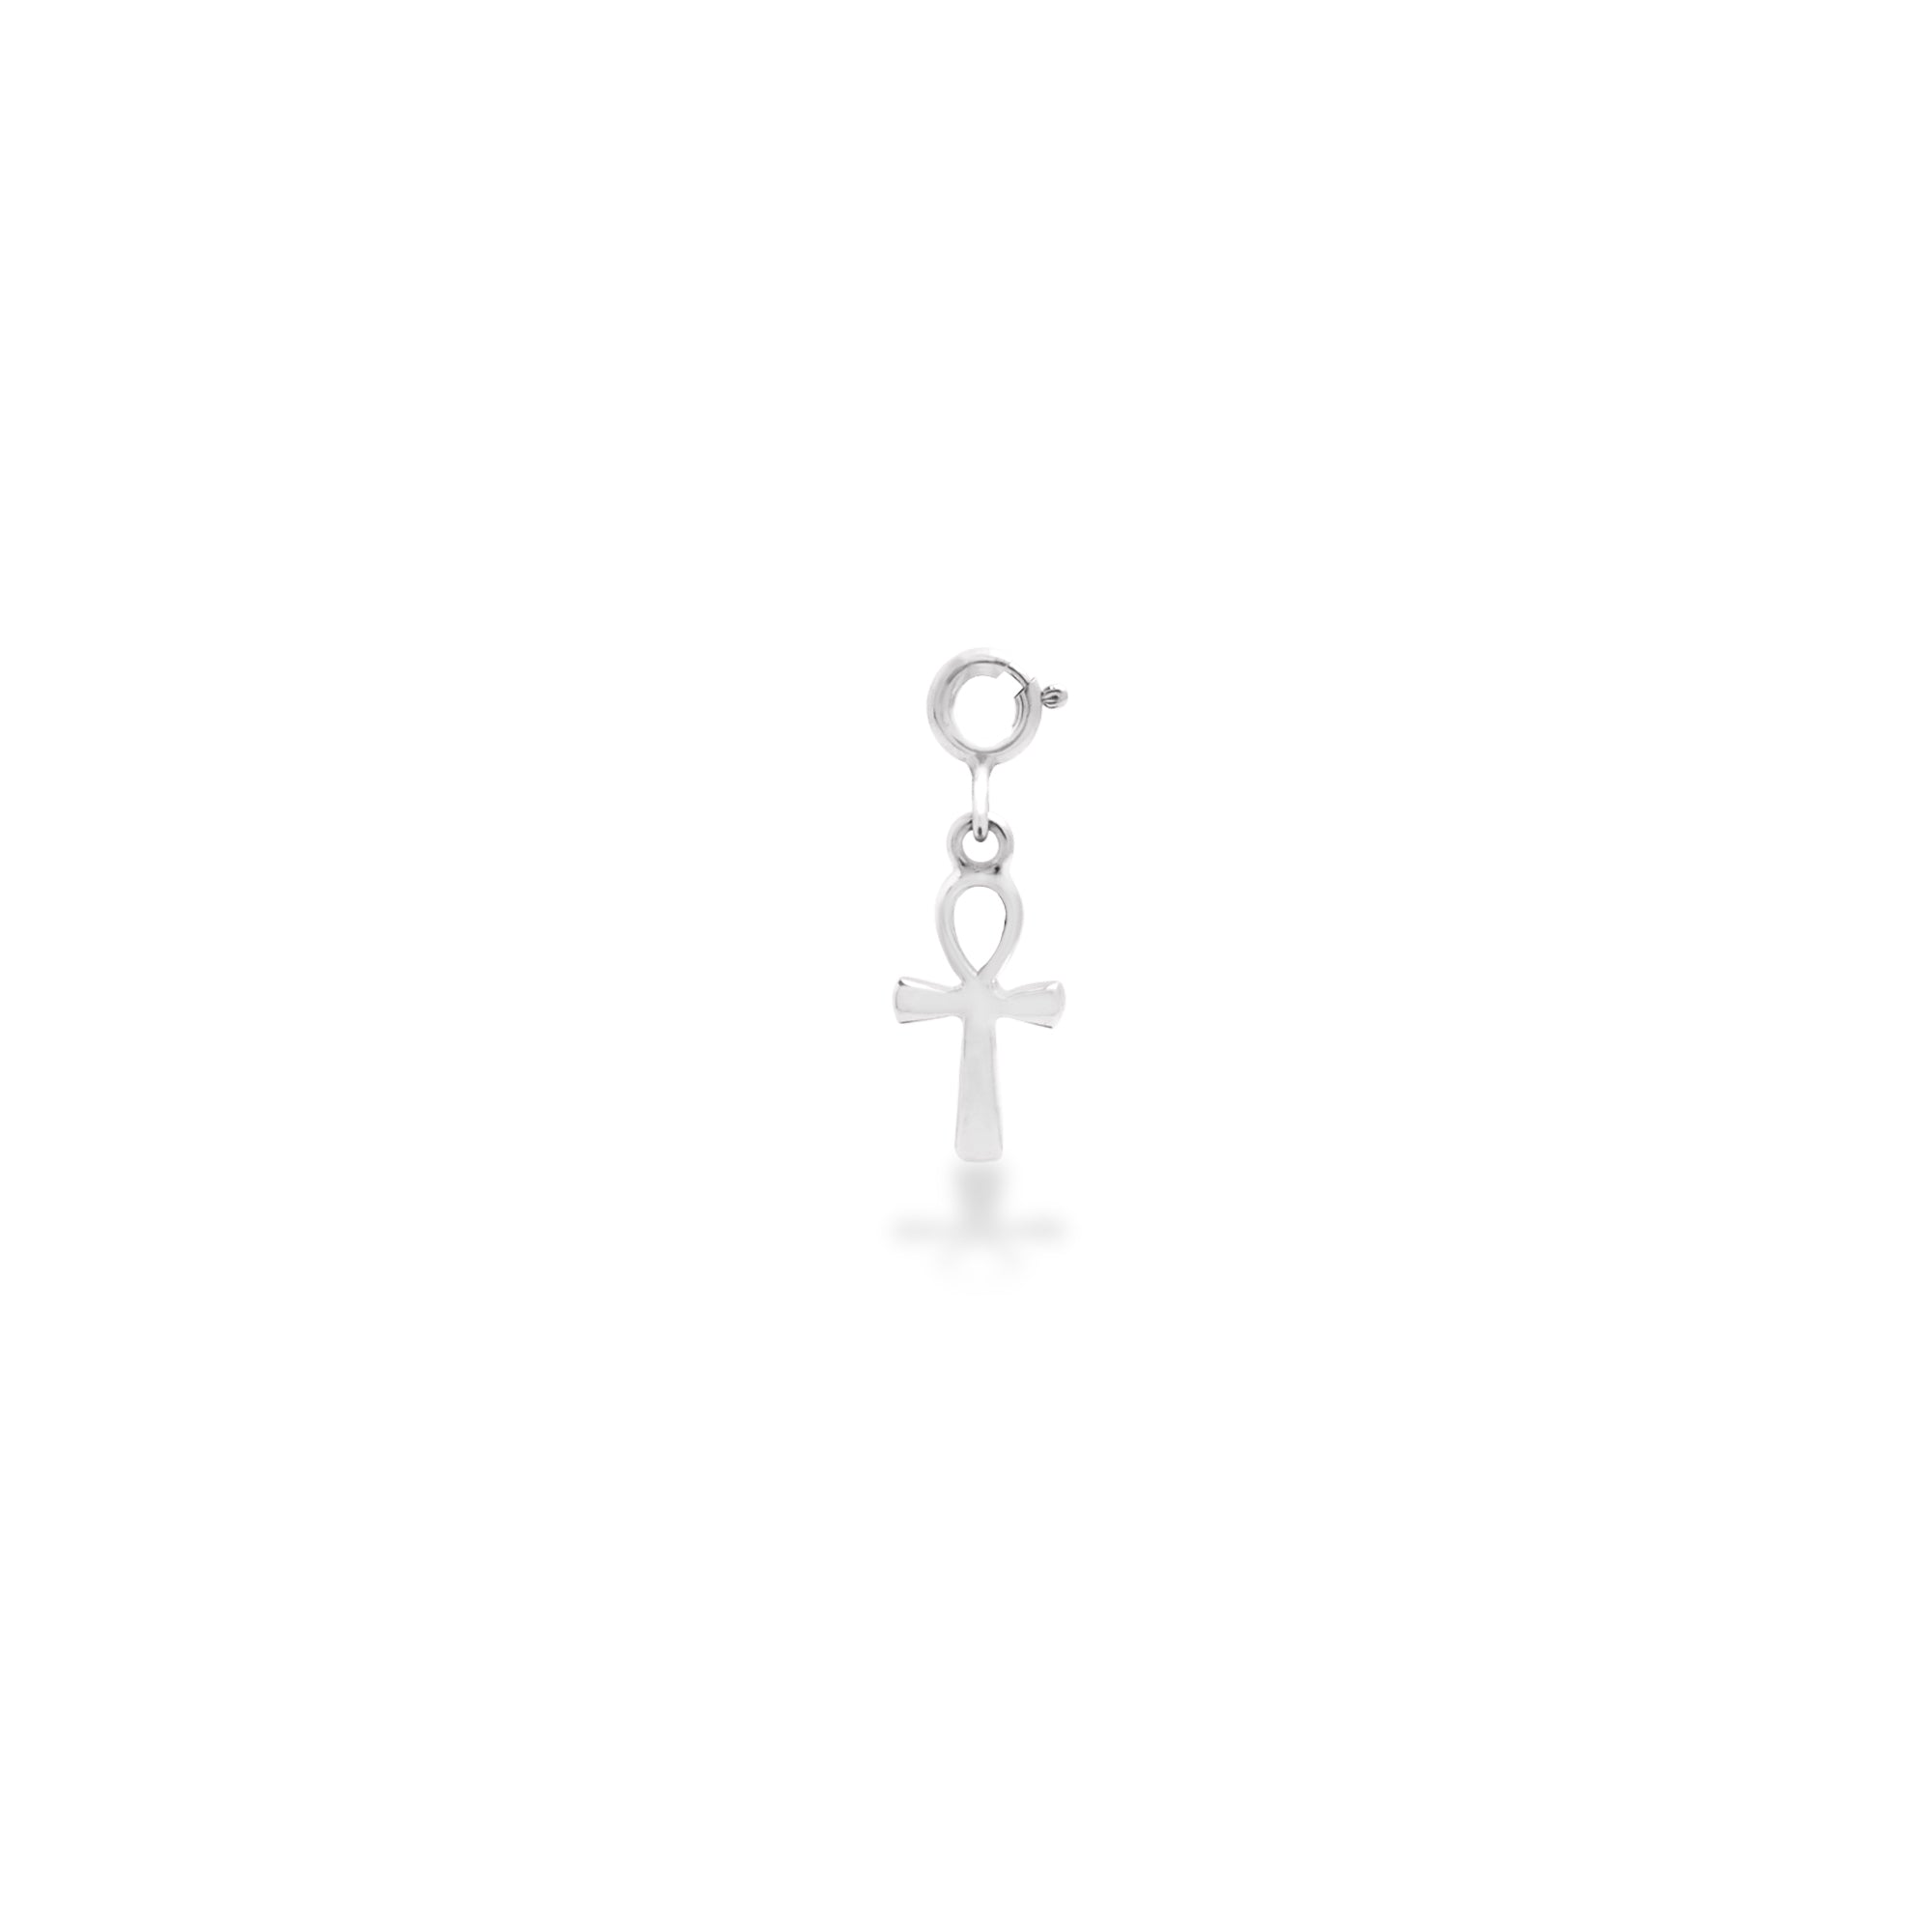 Ahnk Charm Plain in 925 Sterling Silver  (charm only)